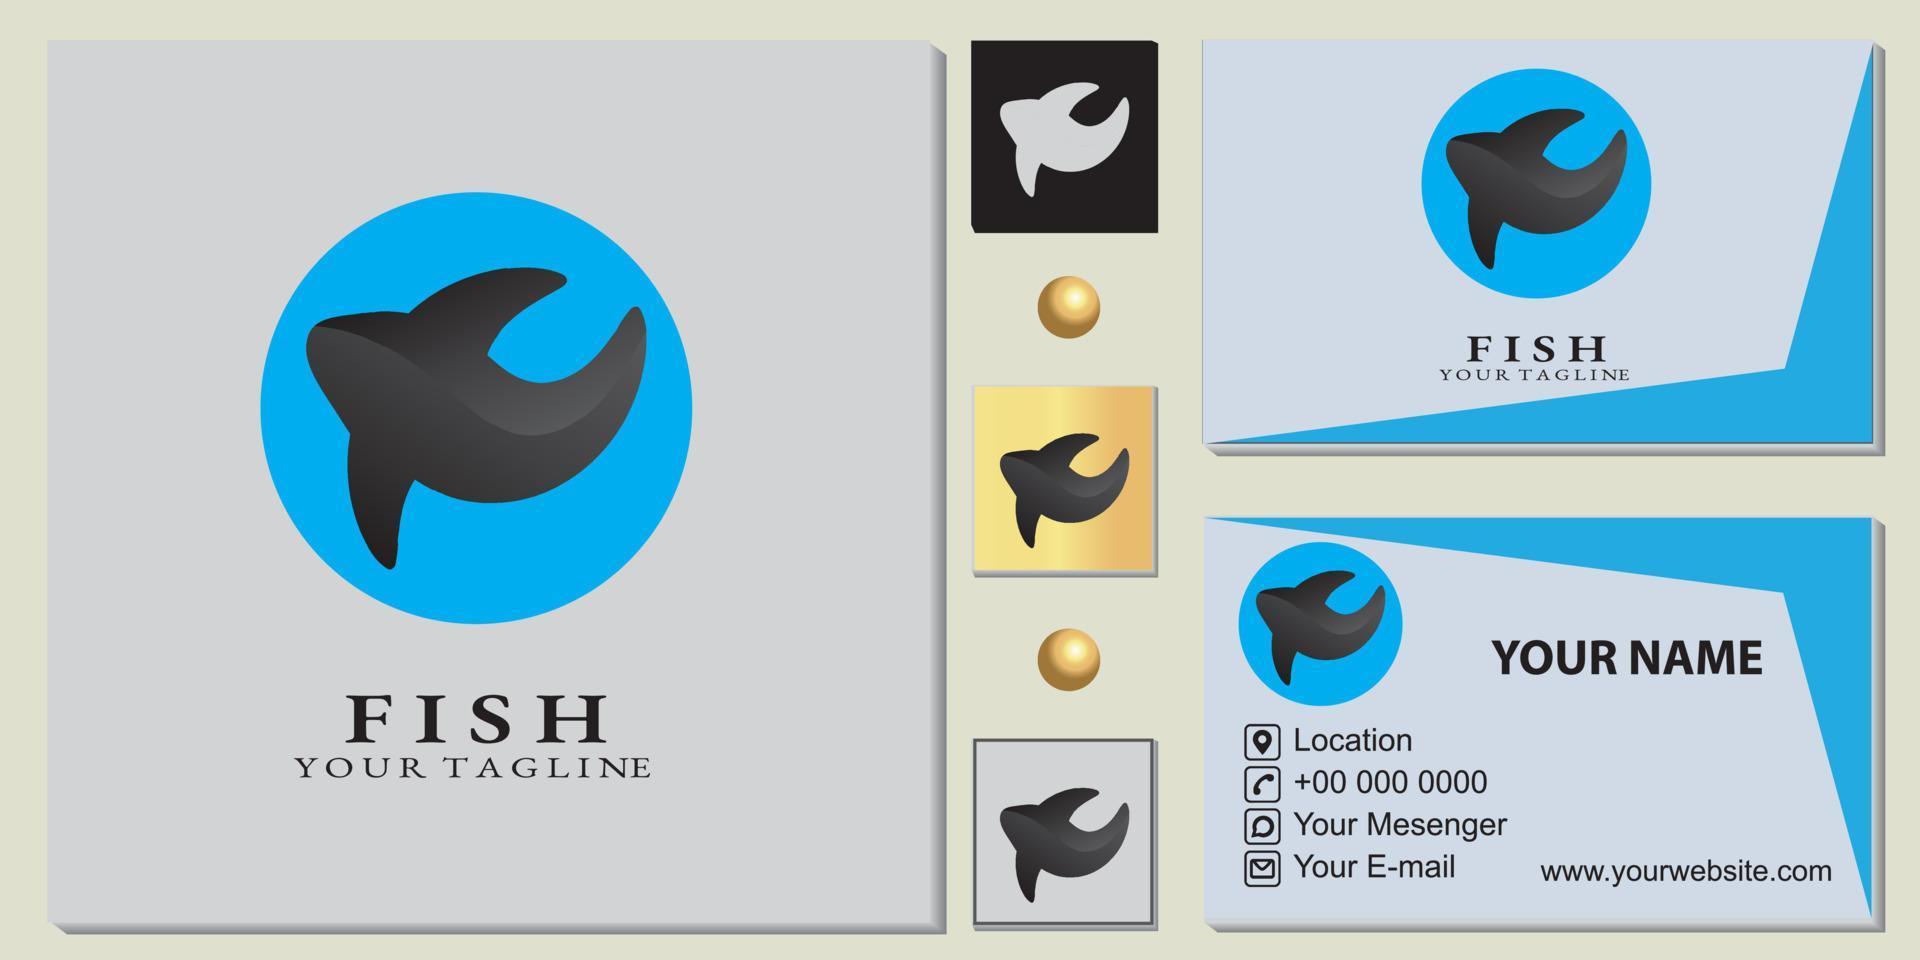 simple fish logo premium template with elegant business card vector eps 10